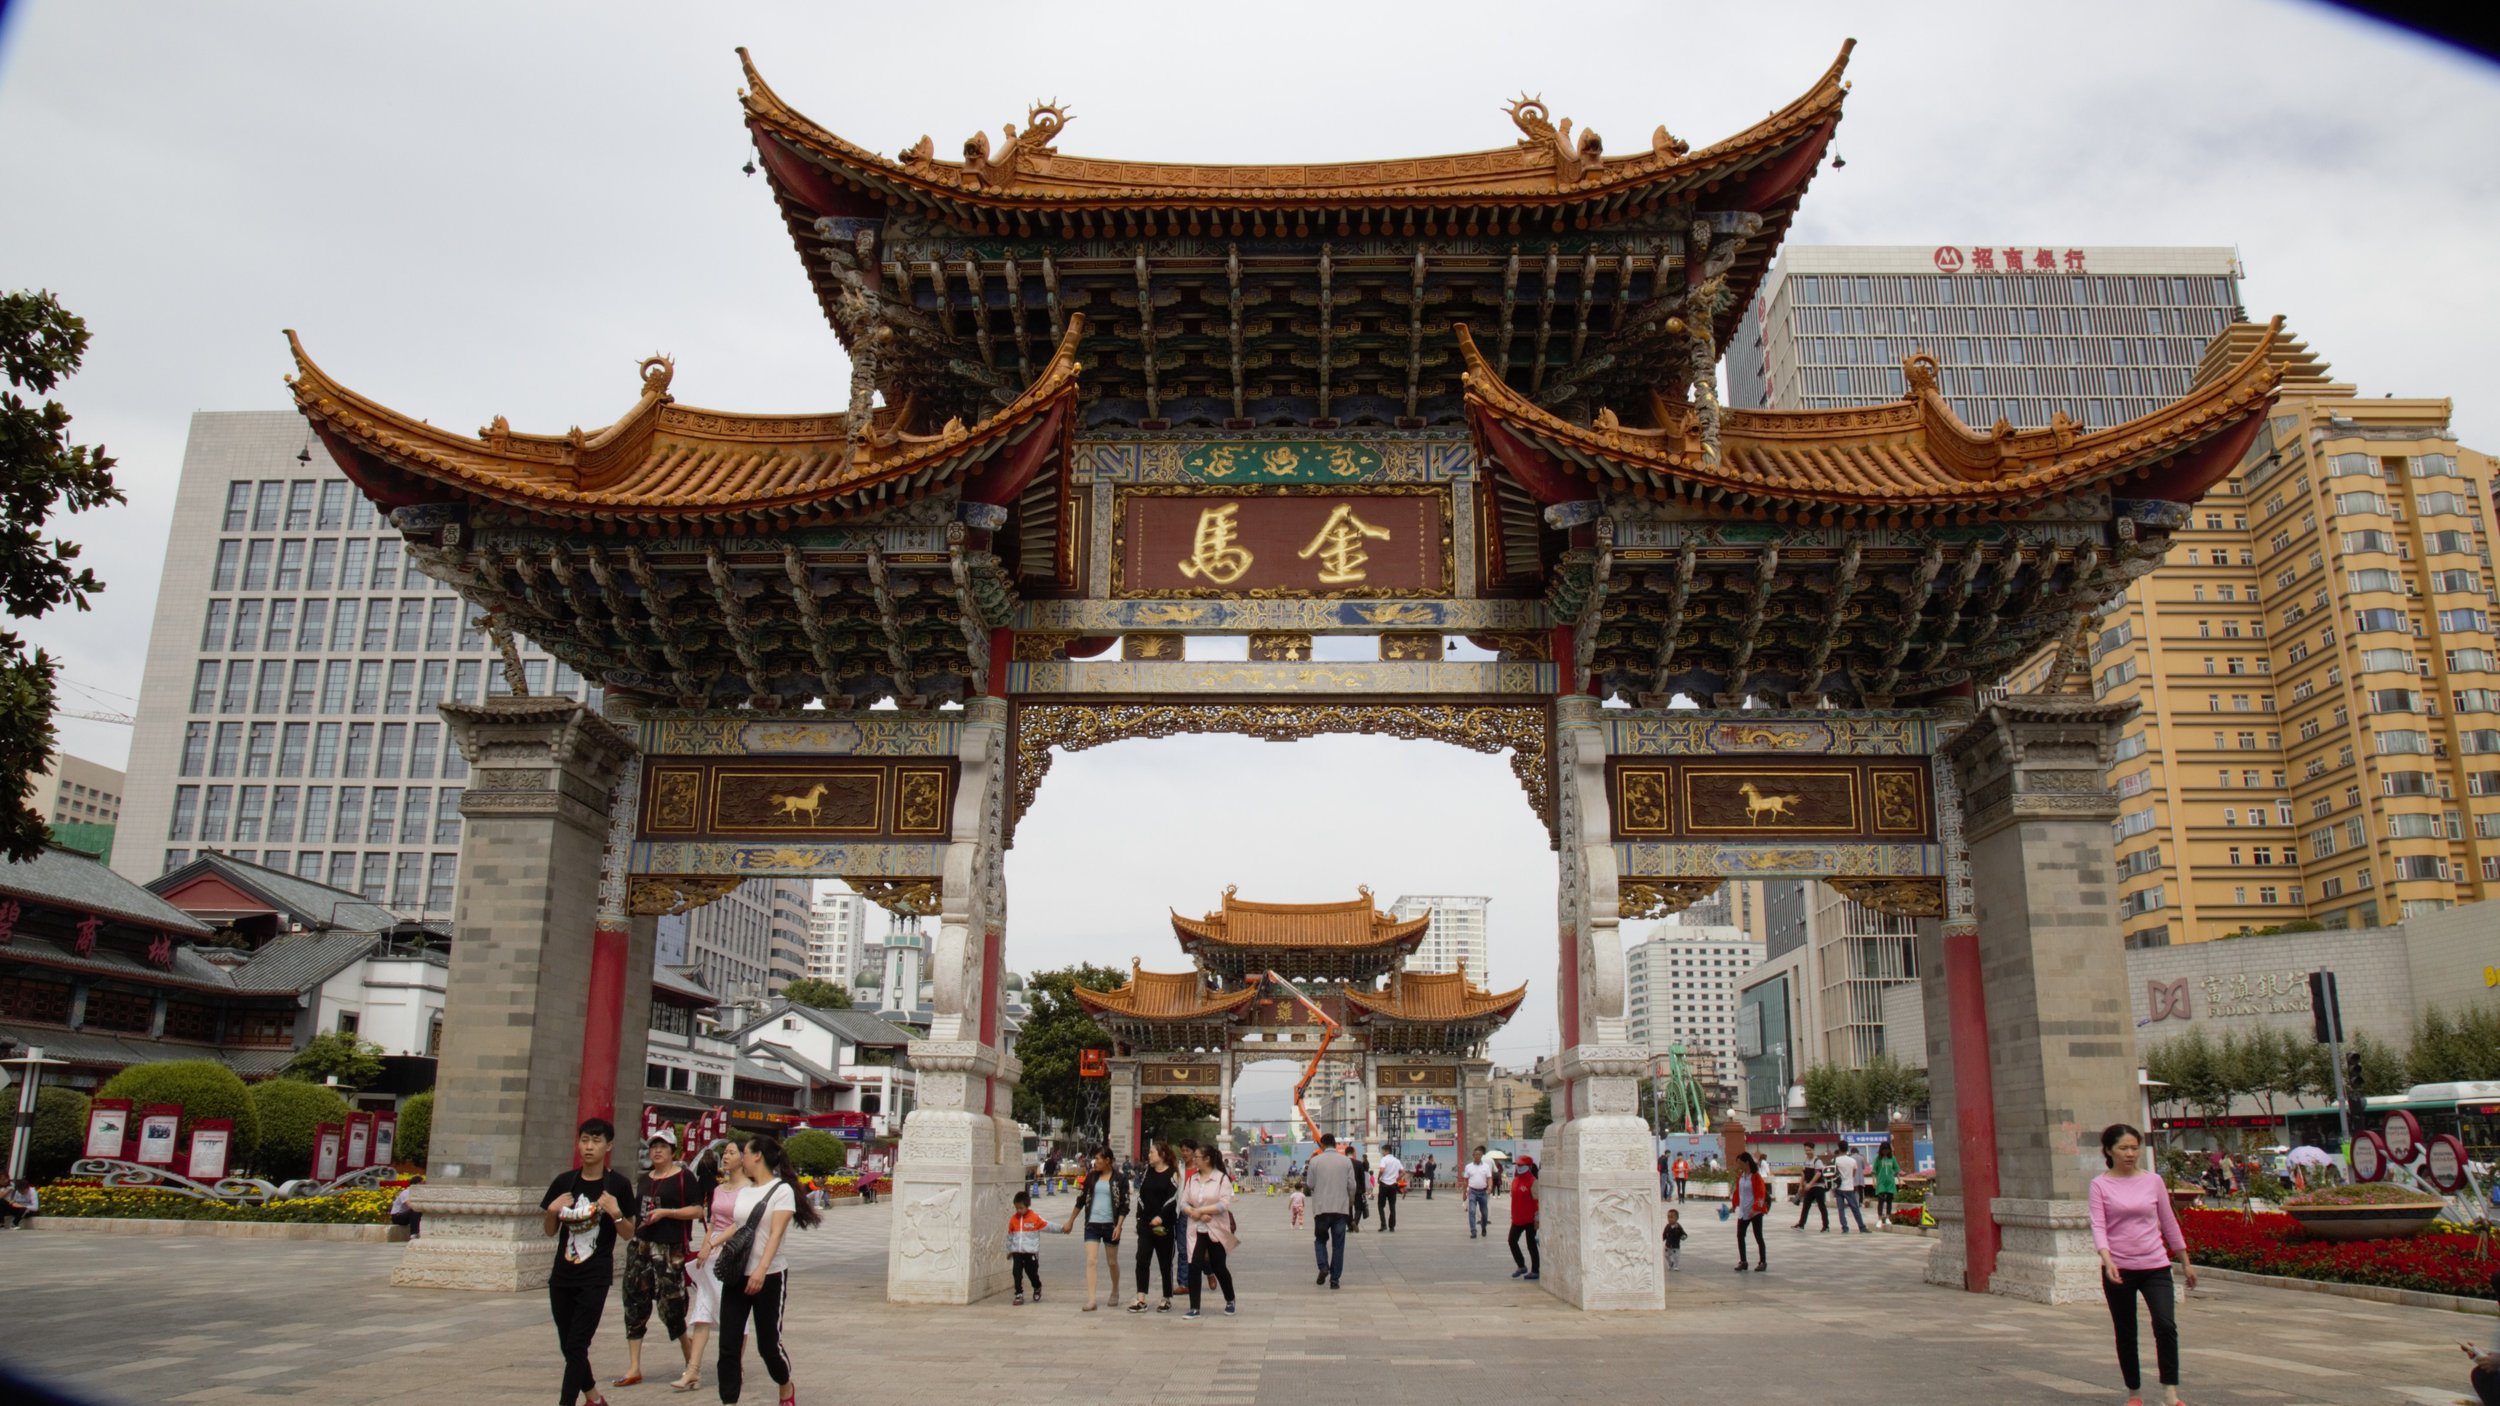 The twin gates of Kunming